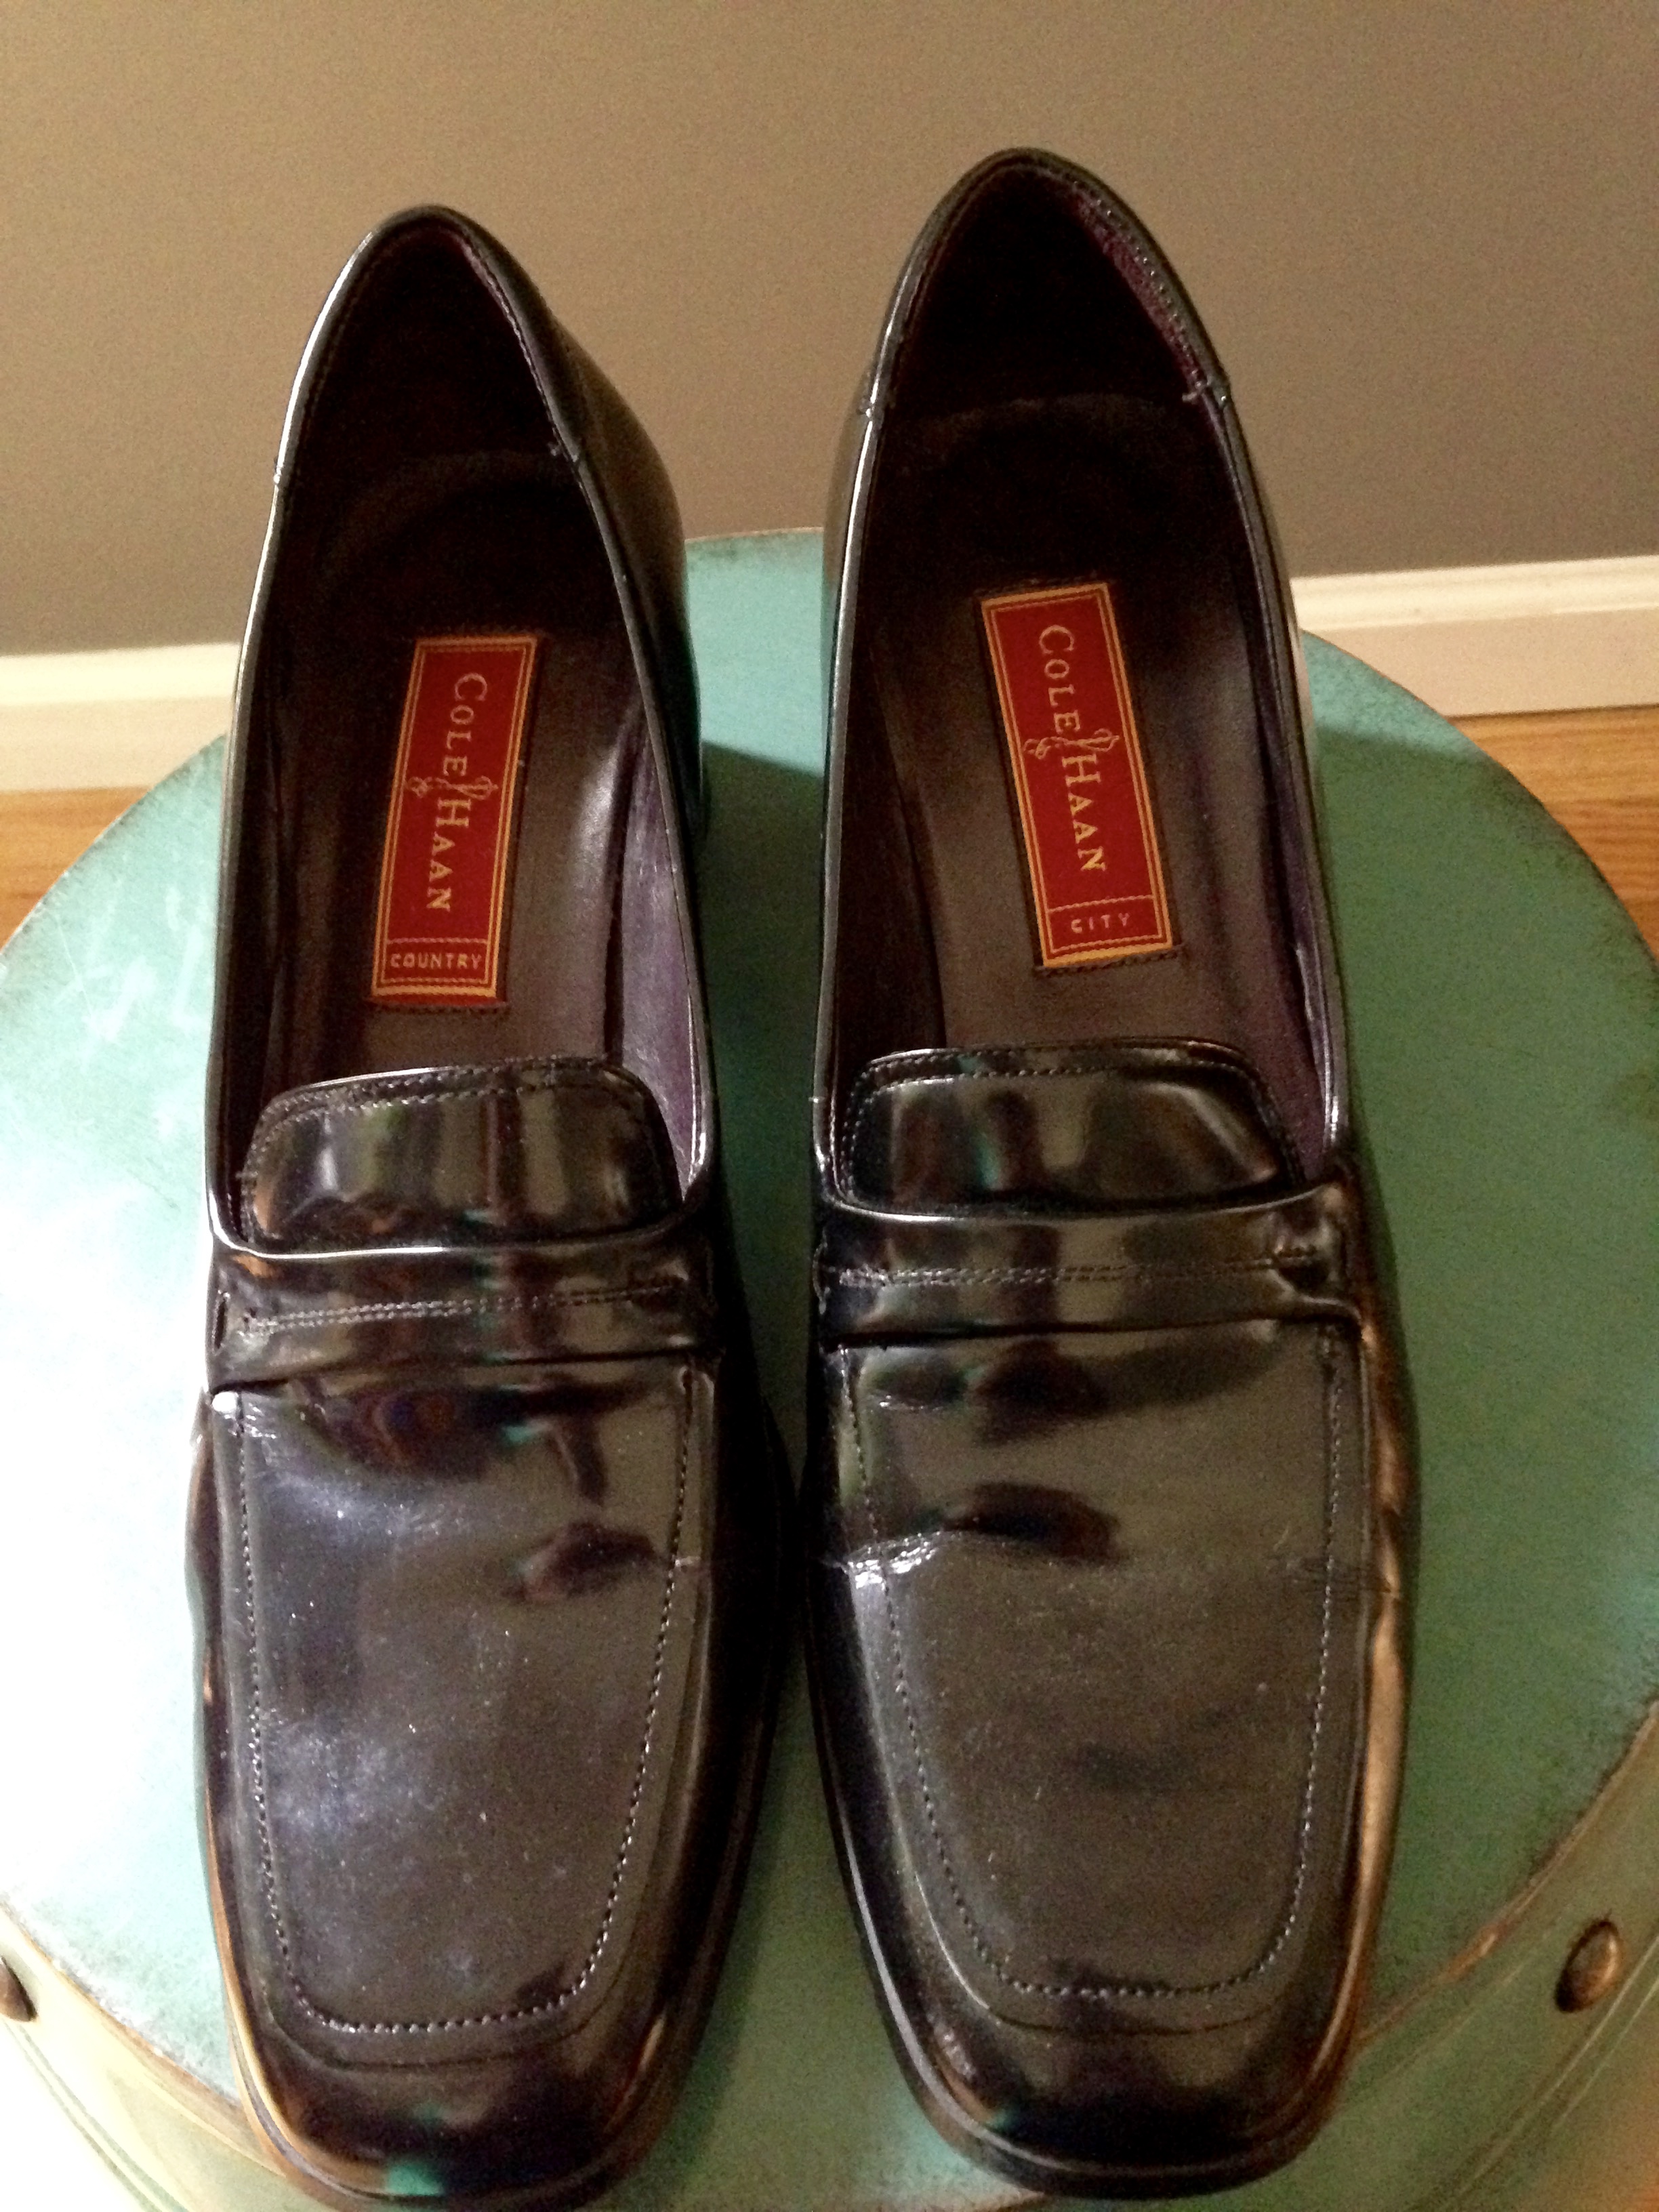 cole haan patent leather